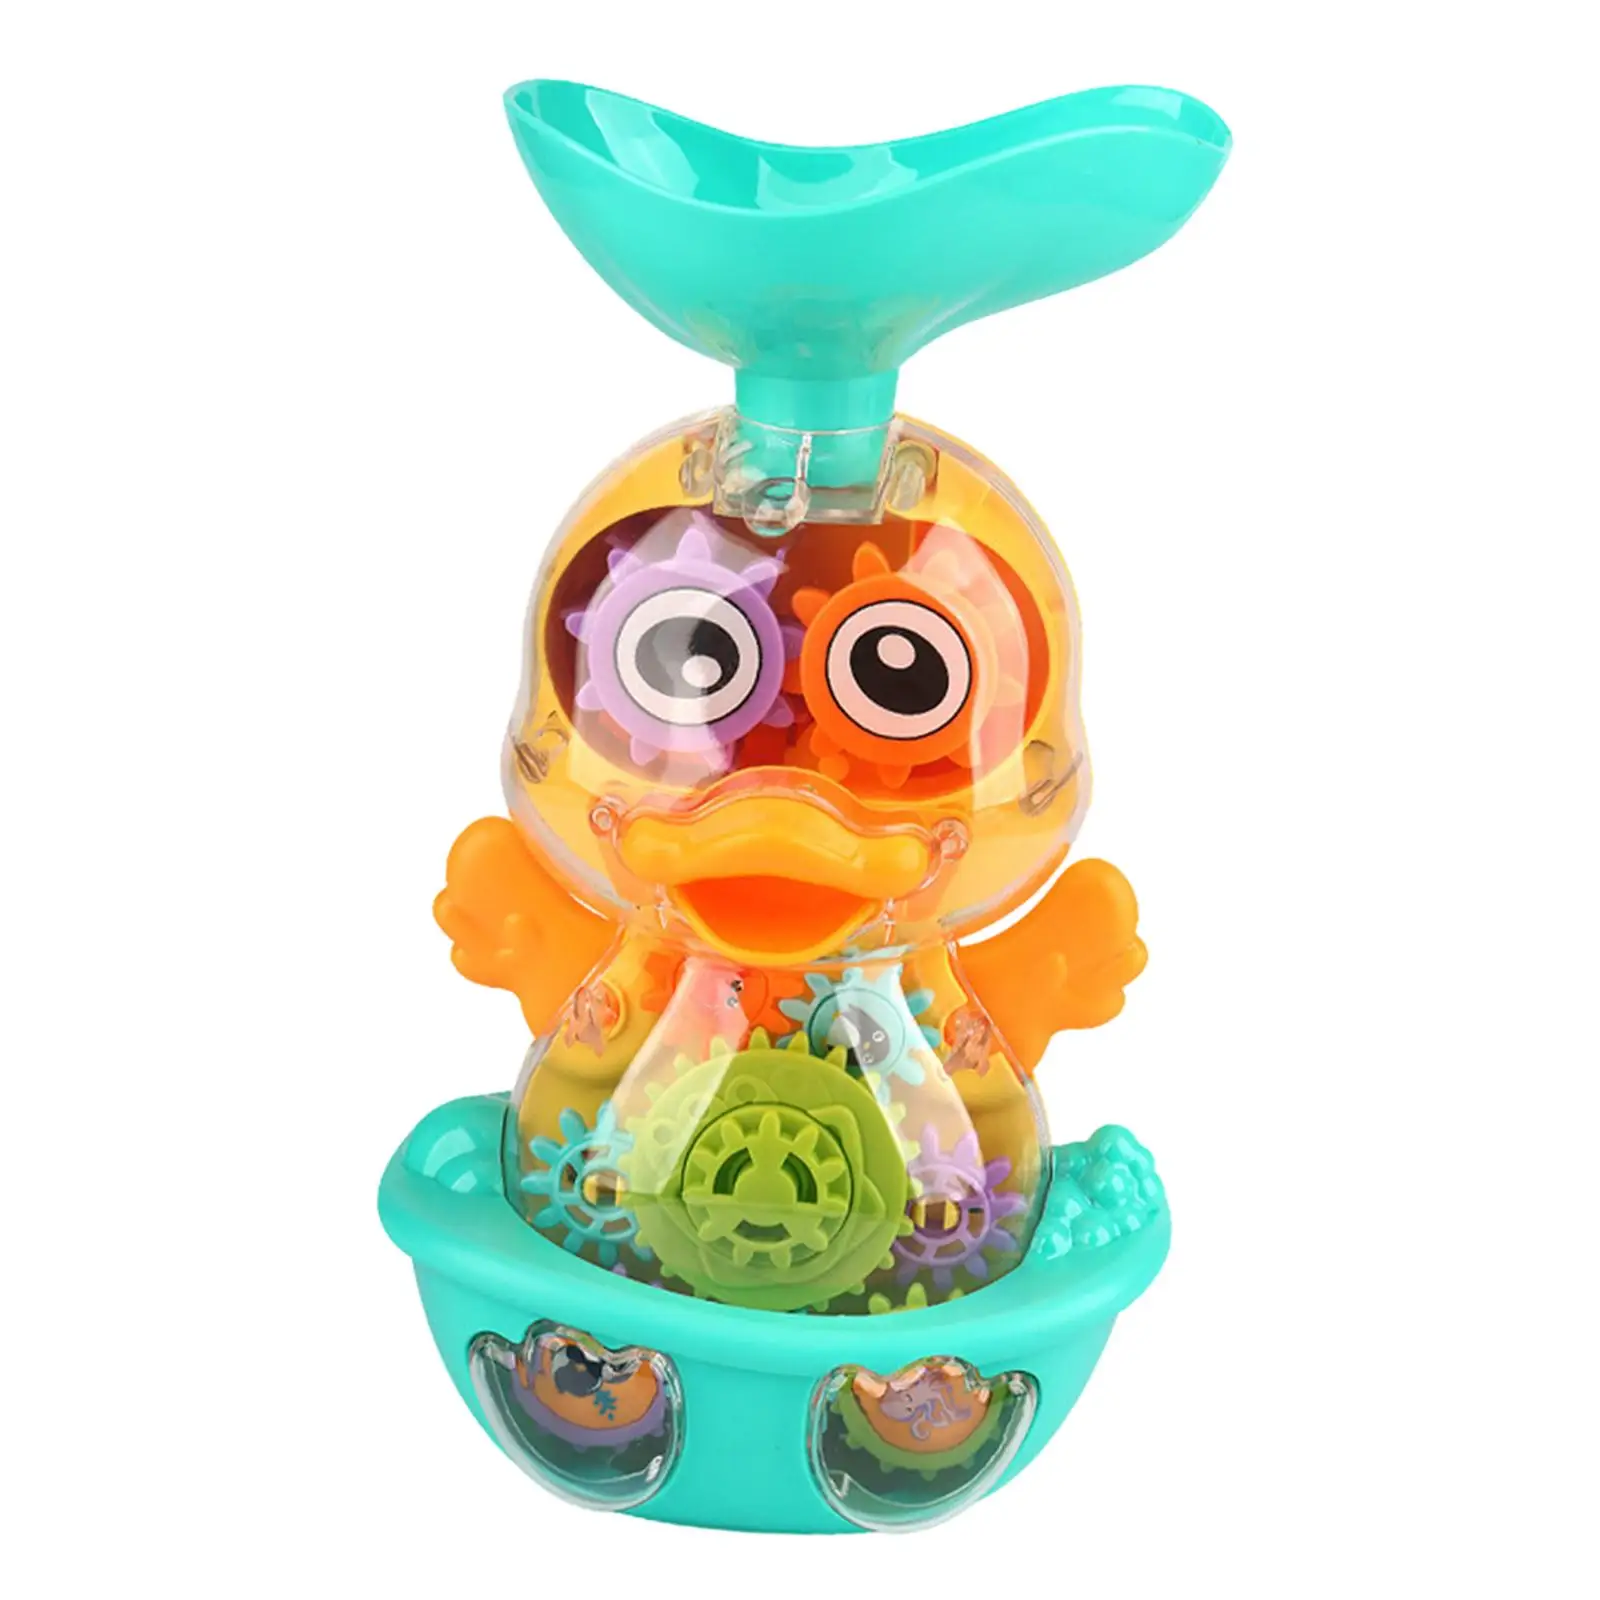 Duck Bath Toys Gear Toy Bathtub Duck Toy for Children Kids Holiday Gifts